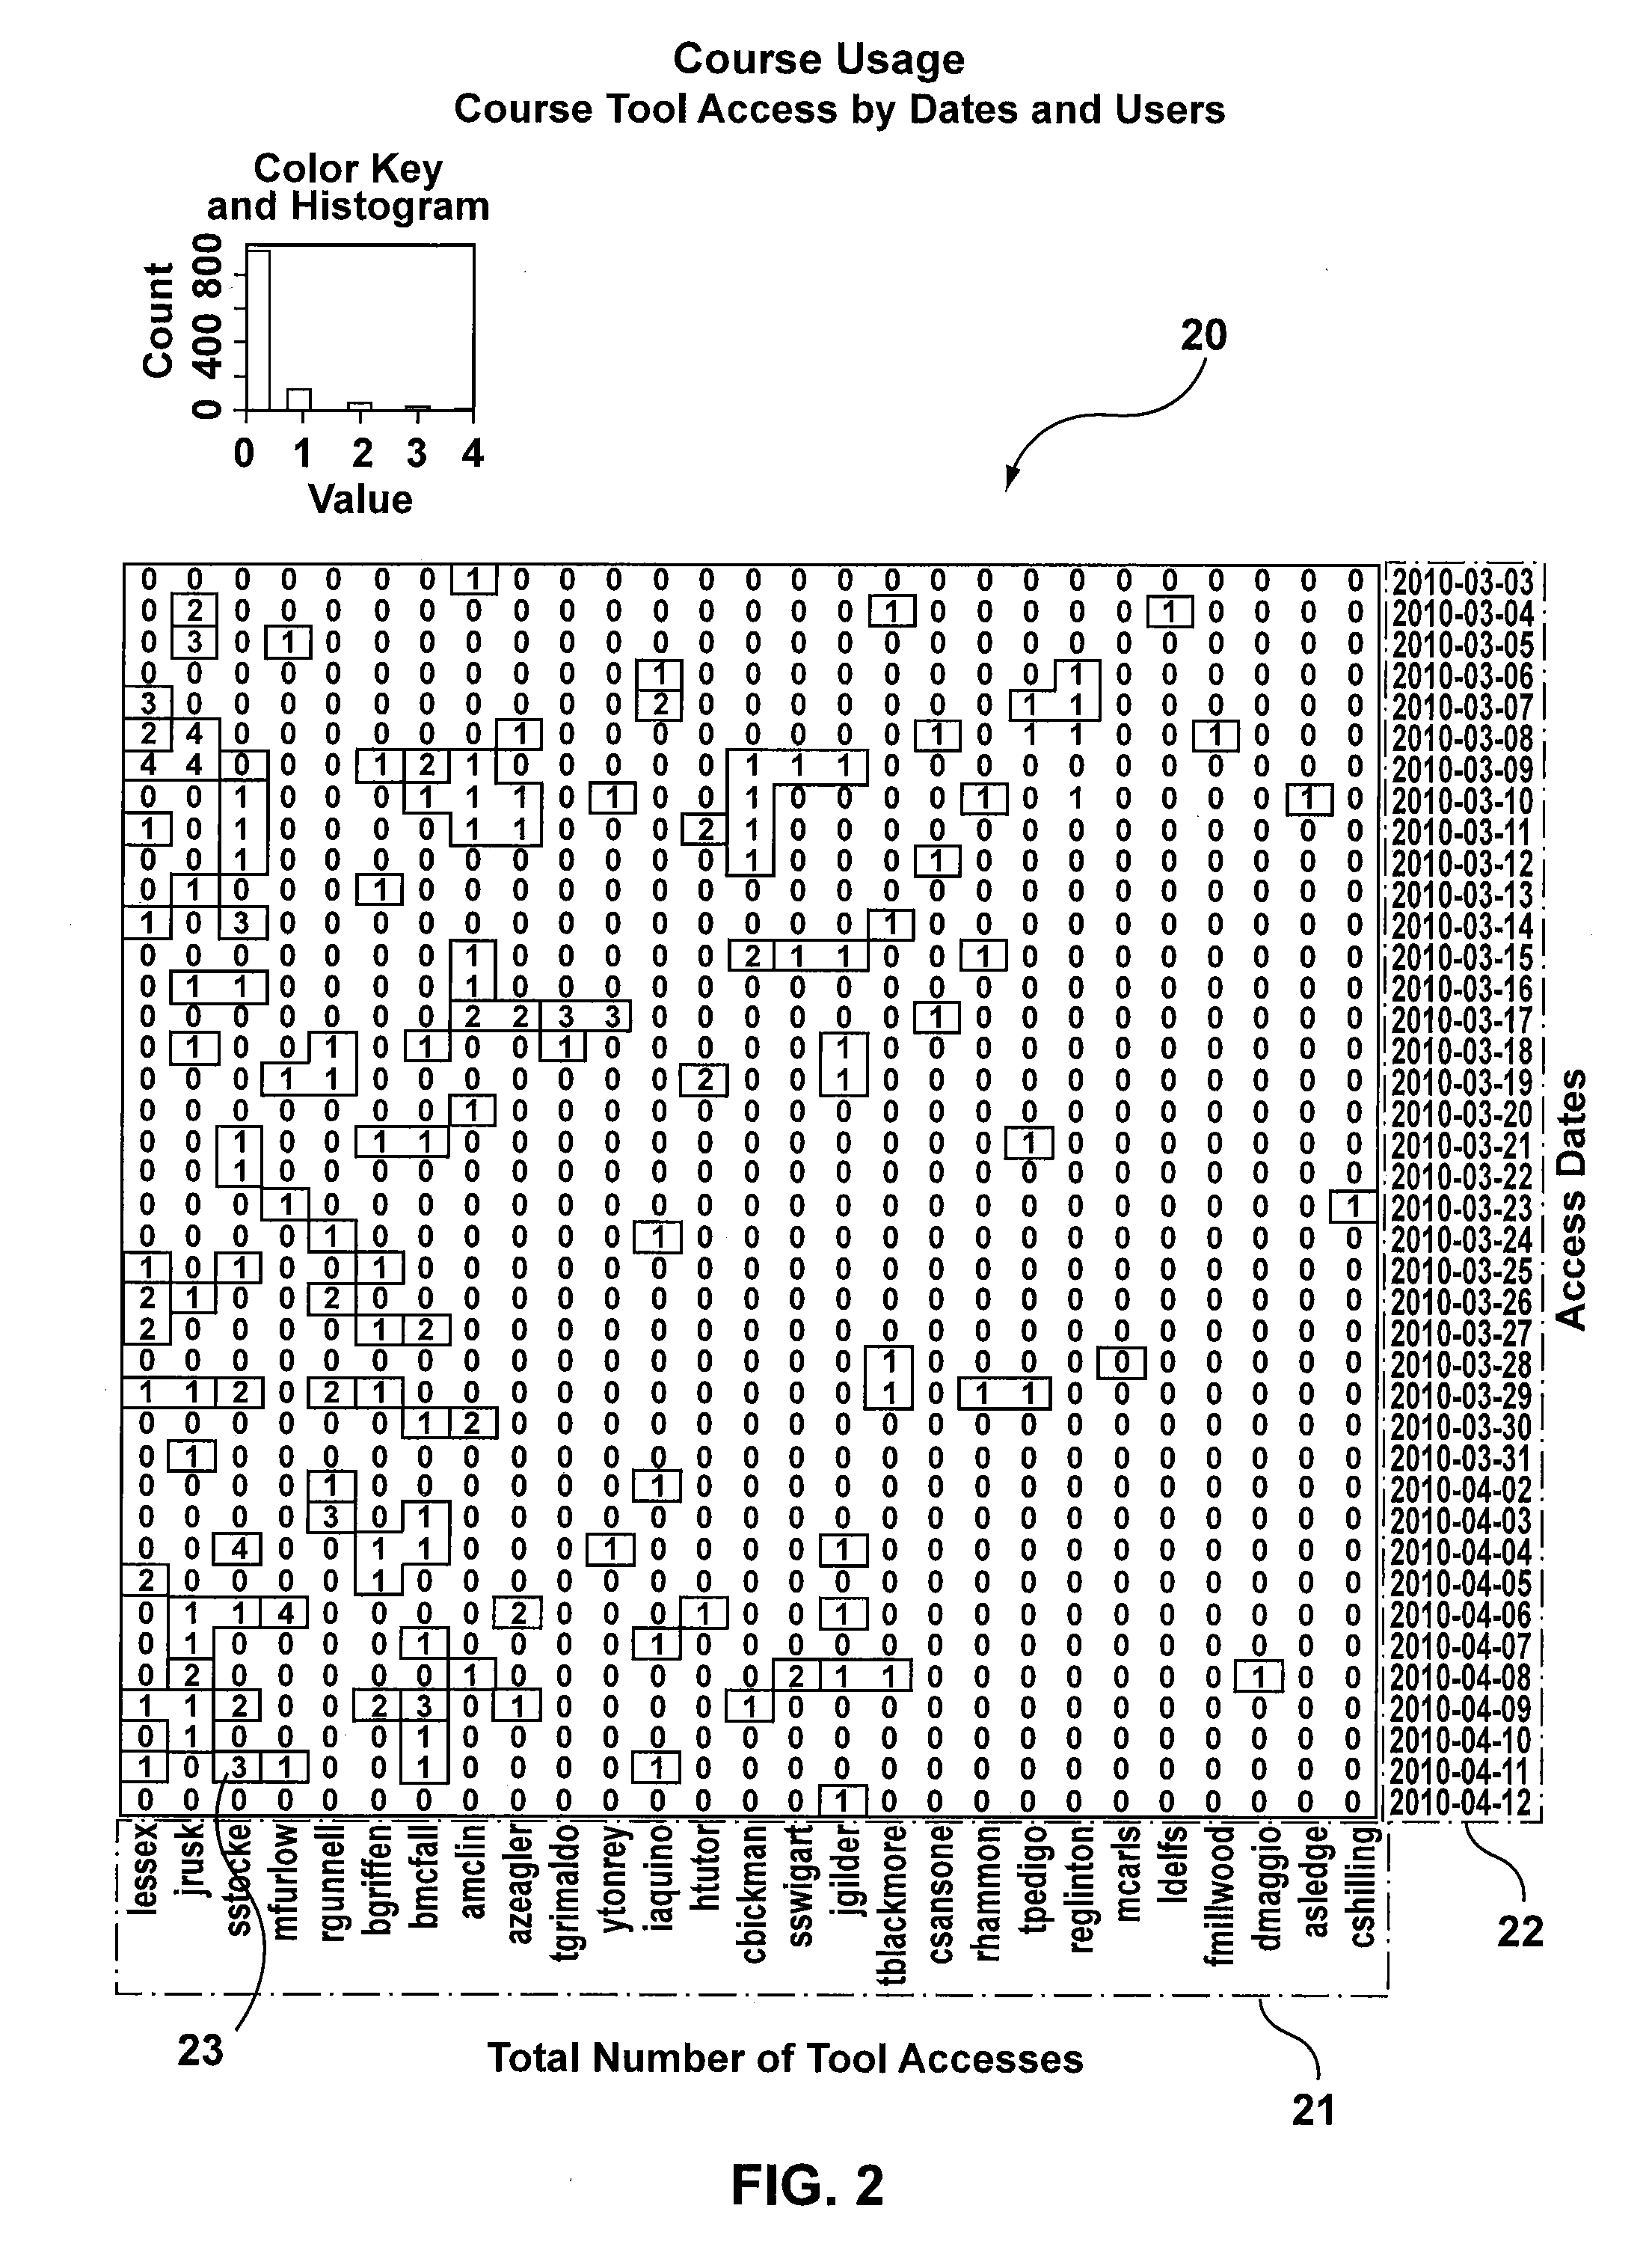 Systems and methods for analyzing learner's roles and performance and for intelligently adapting the delivery of education